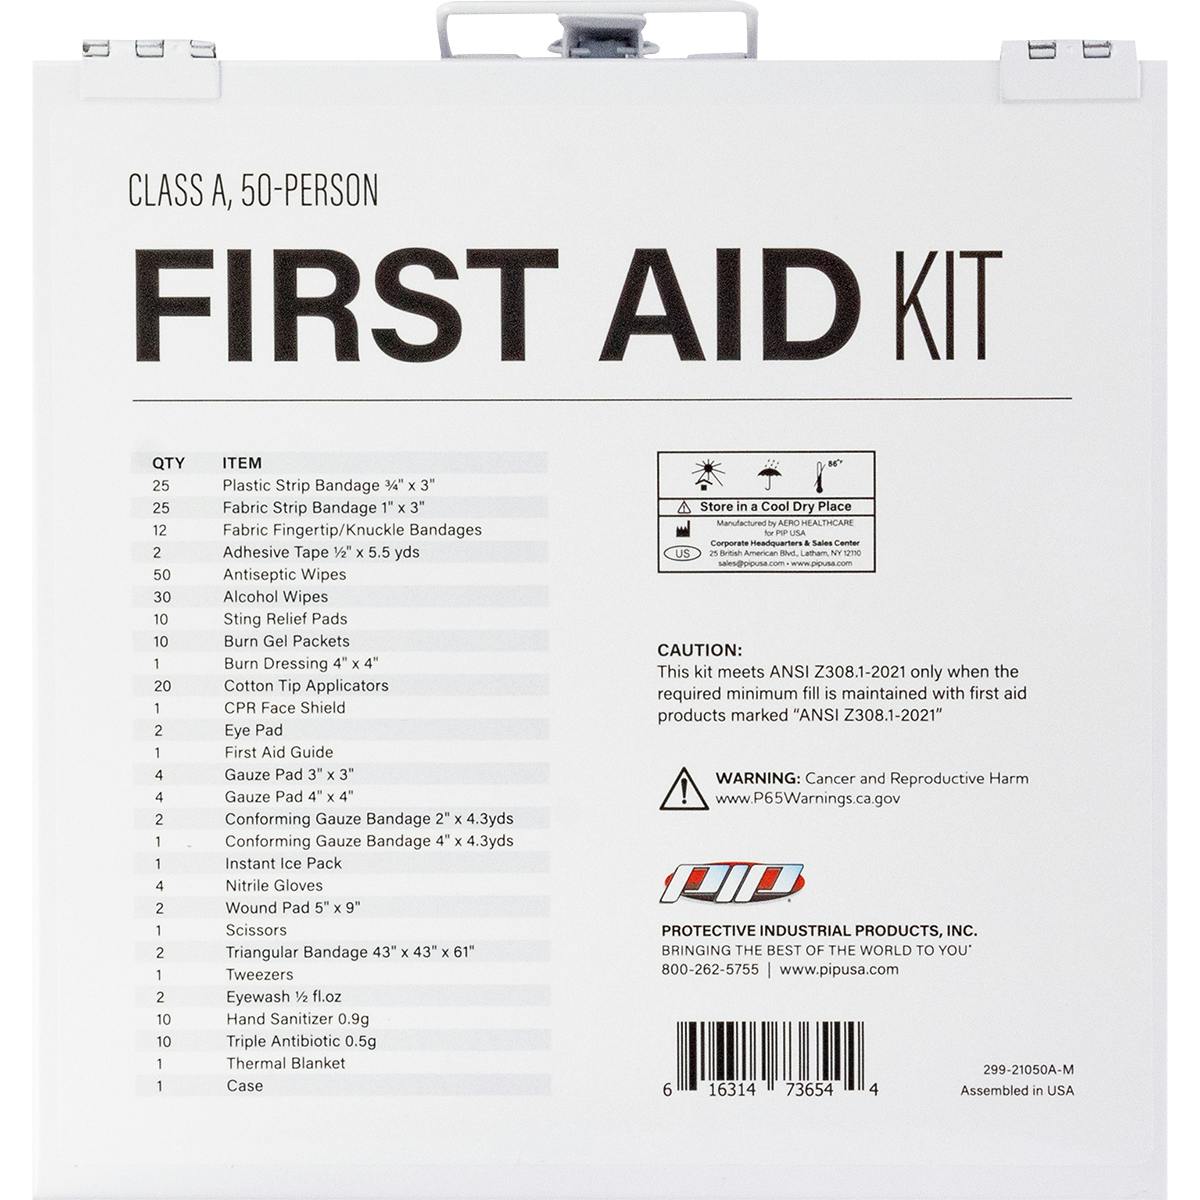 ANSI Class A Waterproof First Aid Kit - 50 Person, White (299-21050A-RP) - KIT_0